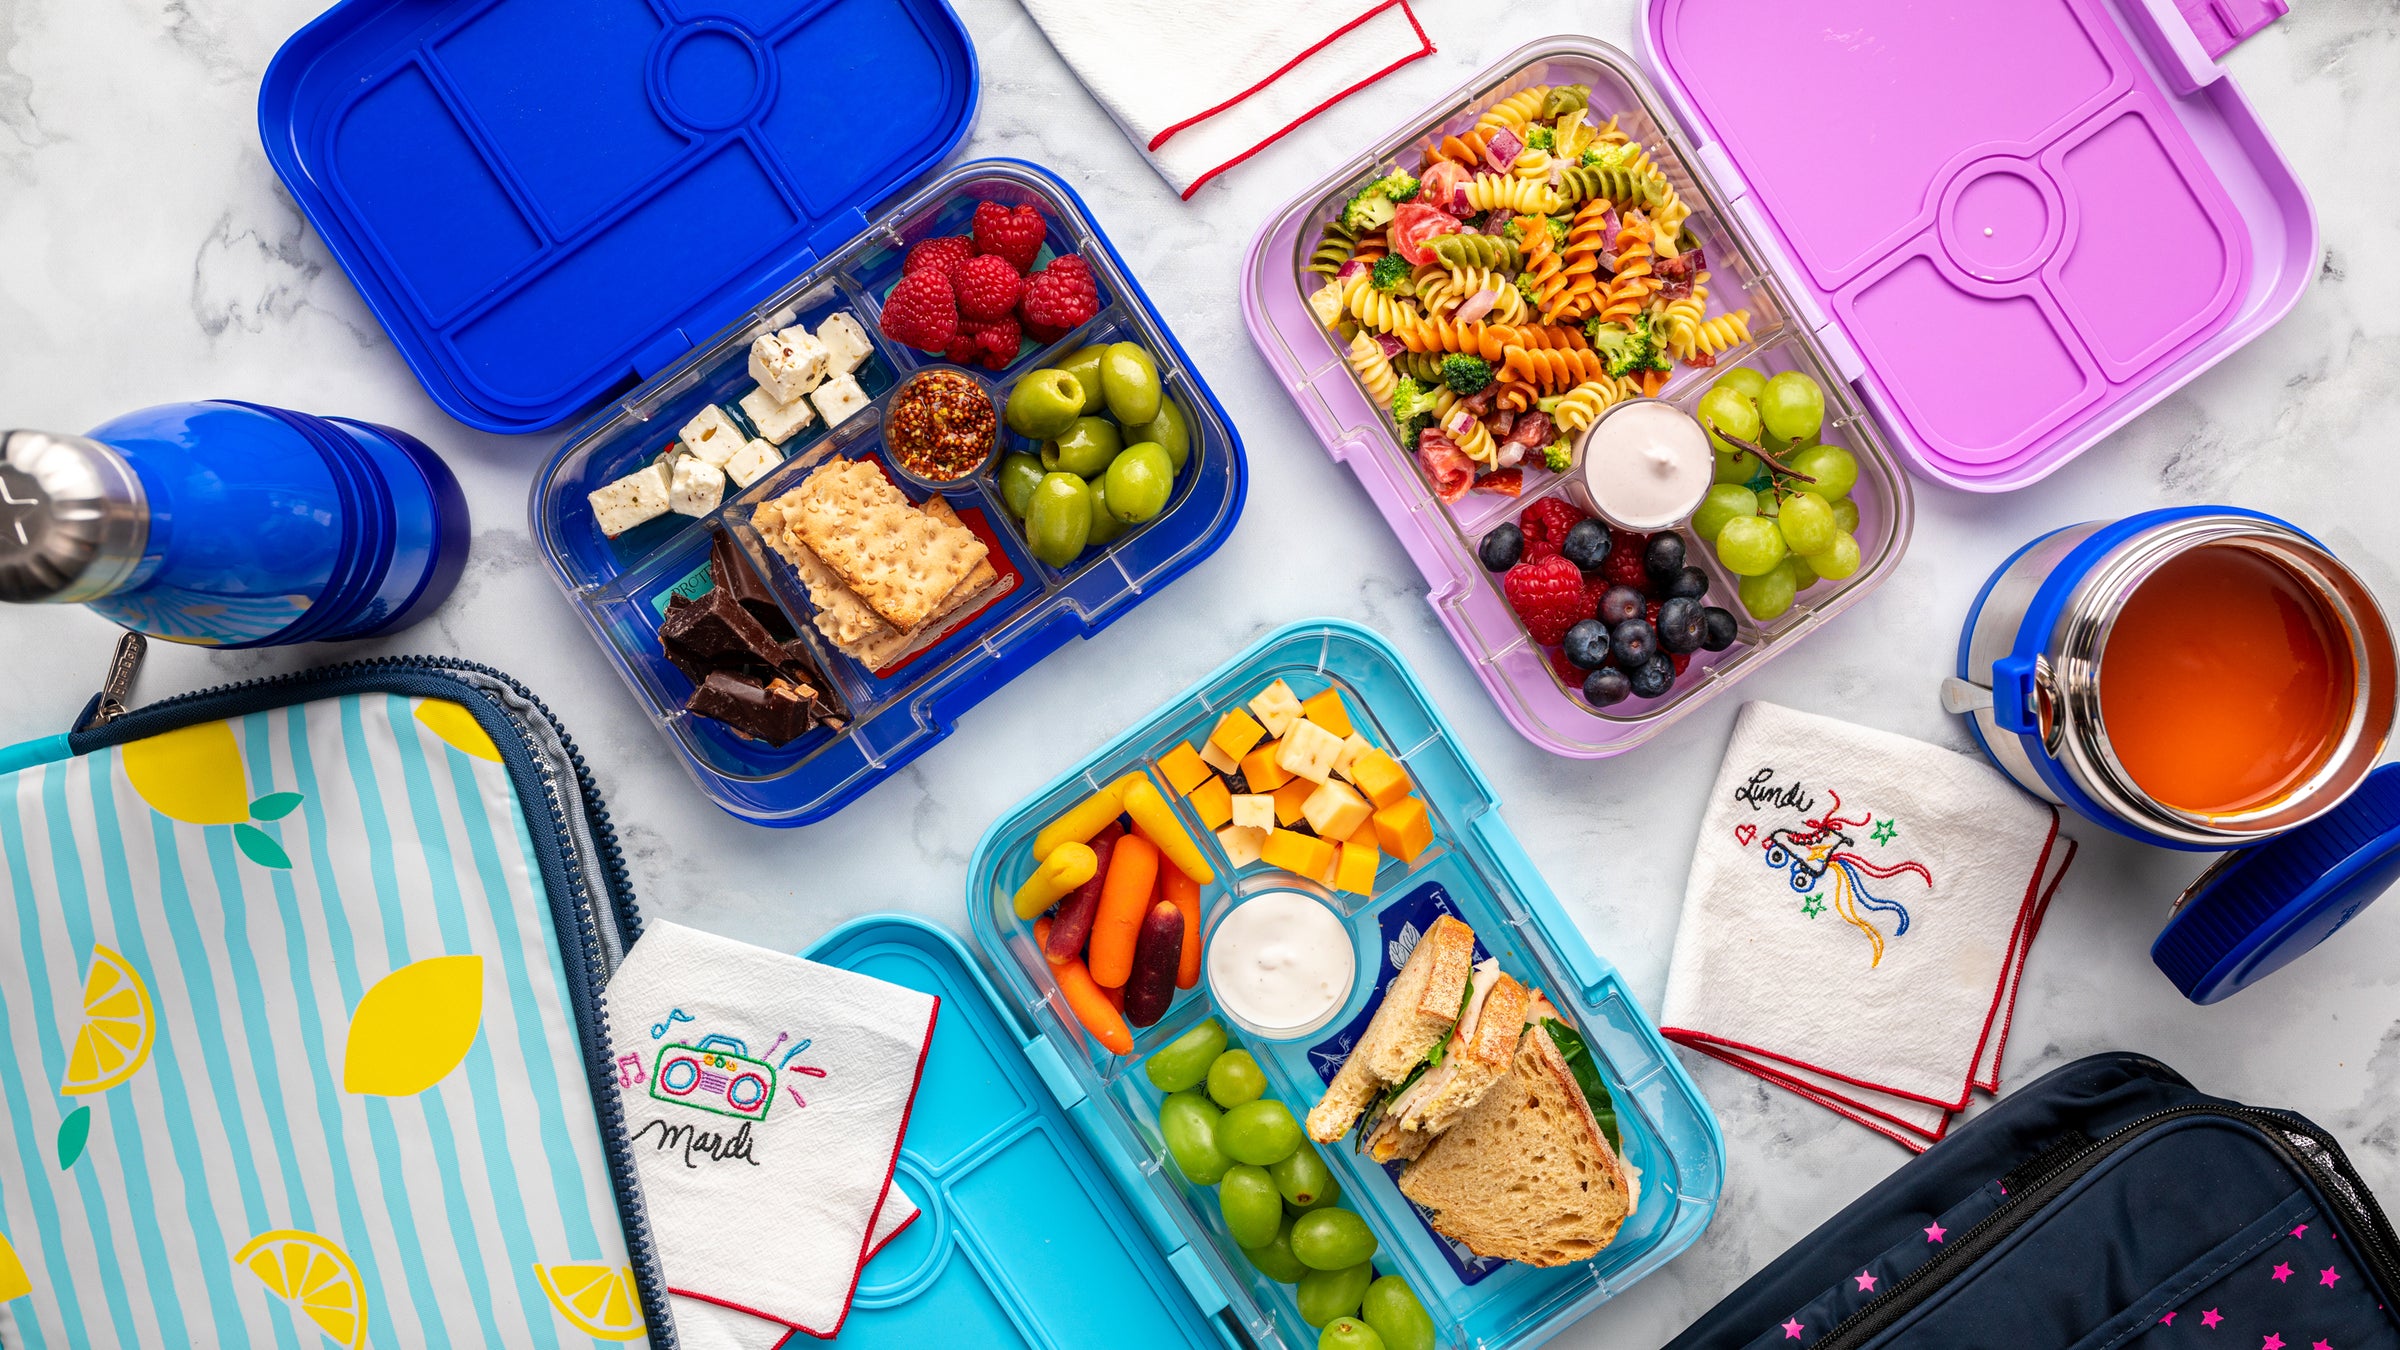 Bluey Lunch Box Kit for Kids Boys Includes Plastic Snacks Storage and Sandwich Container BPA-Free Dishwasher Safe Toddler-Friendly Lunch Containers